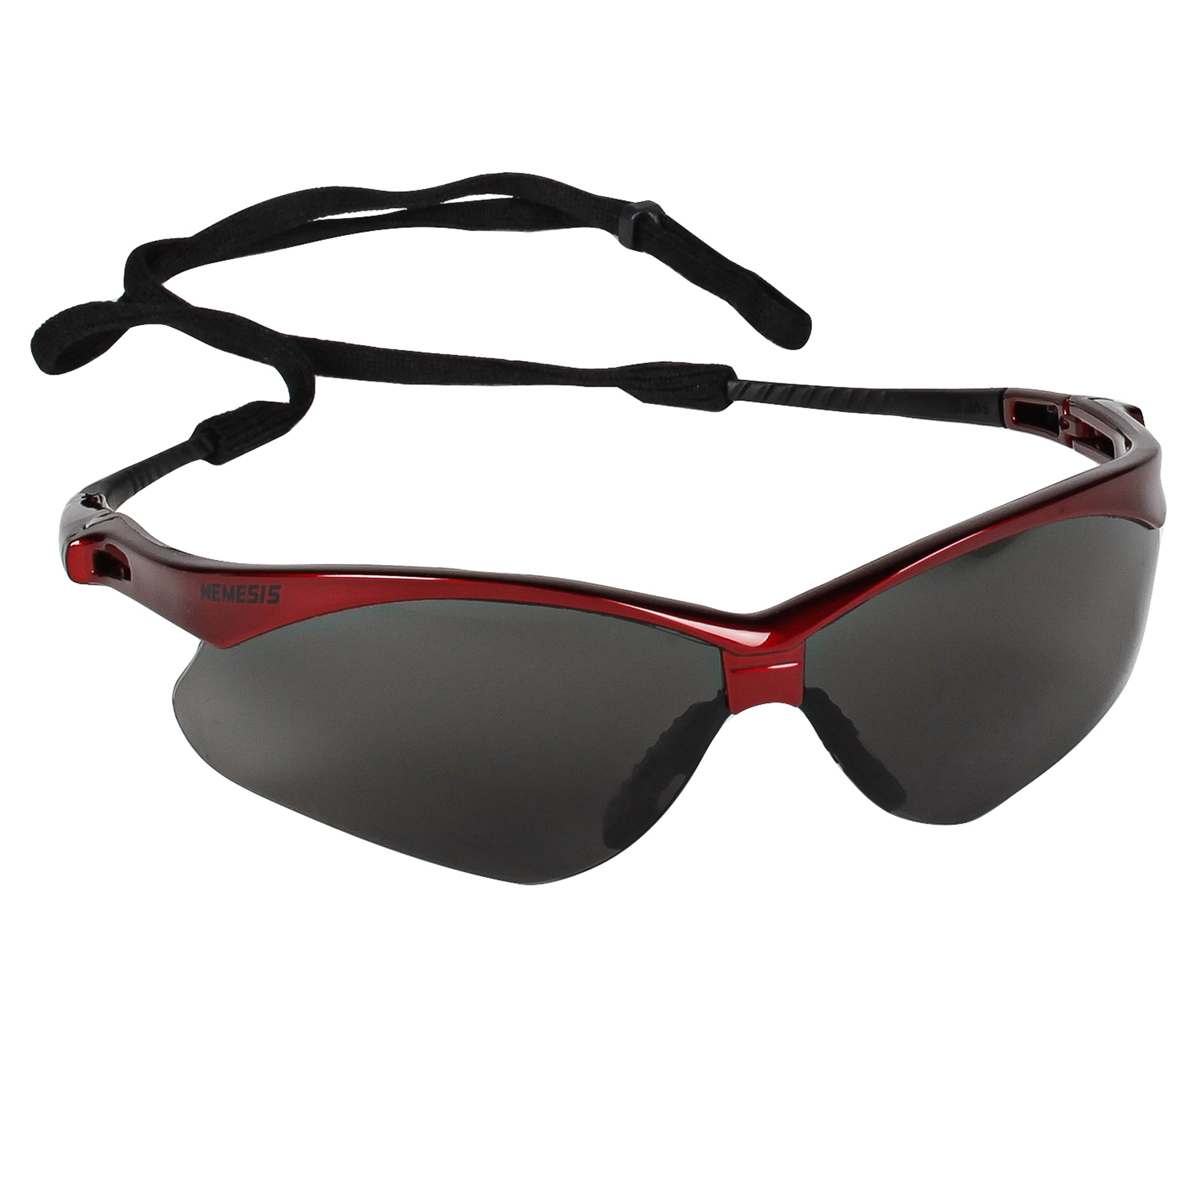 Kimberly-Clark Professional* KleenGuard™ Nemesis* Red Safety Glasses With Smoke Hard Coat Lens (Availability restrictions apply.